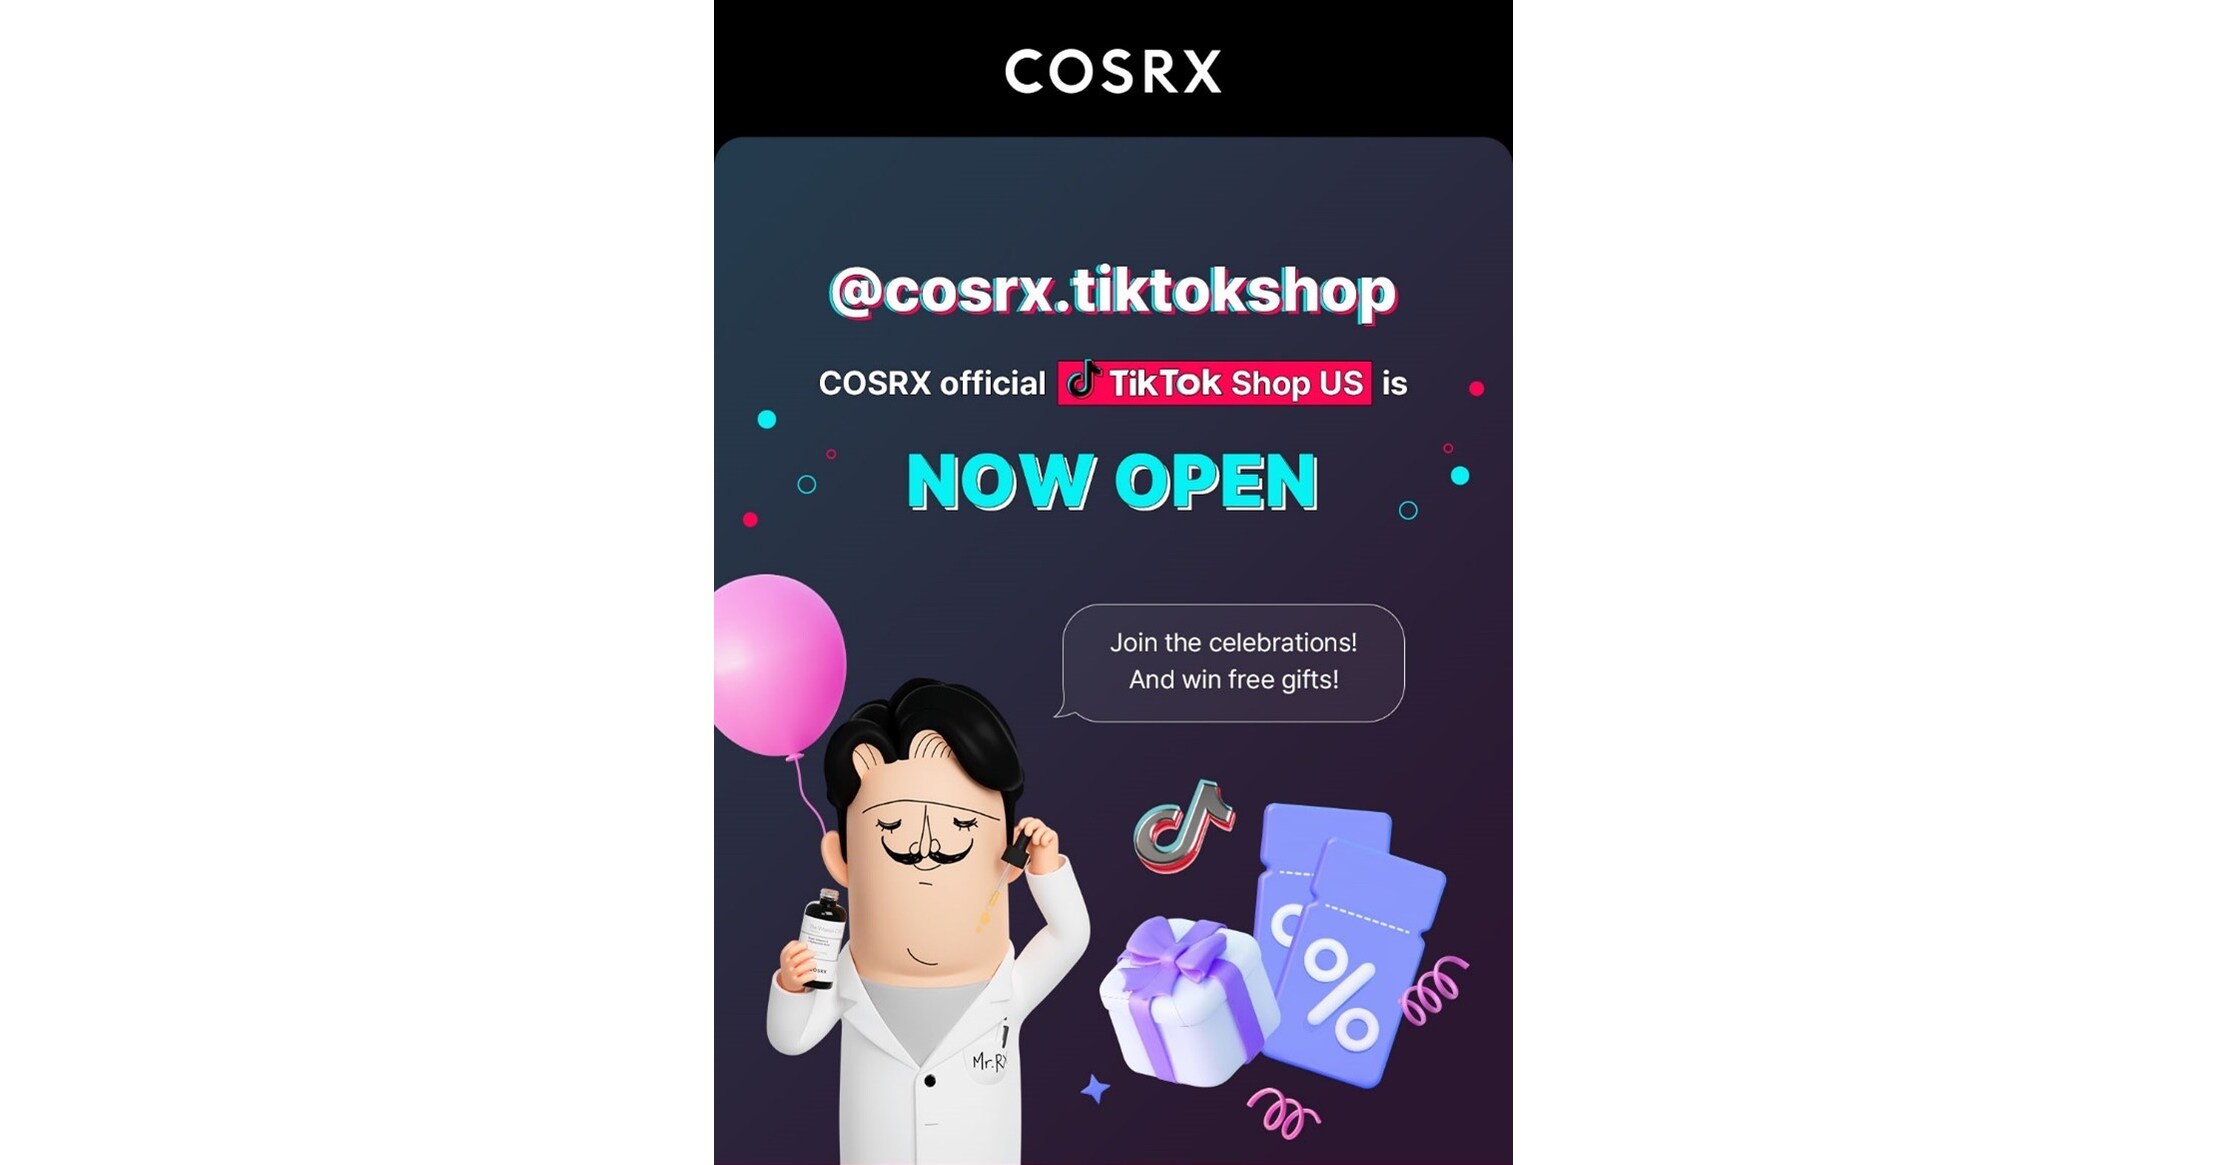 COSRX Launches US TikTok Shop, Inviting Fans to Join the COSRX Affiliate Program